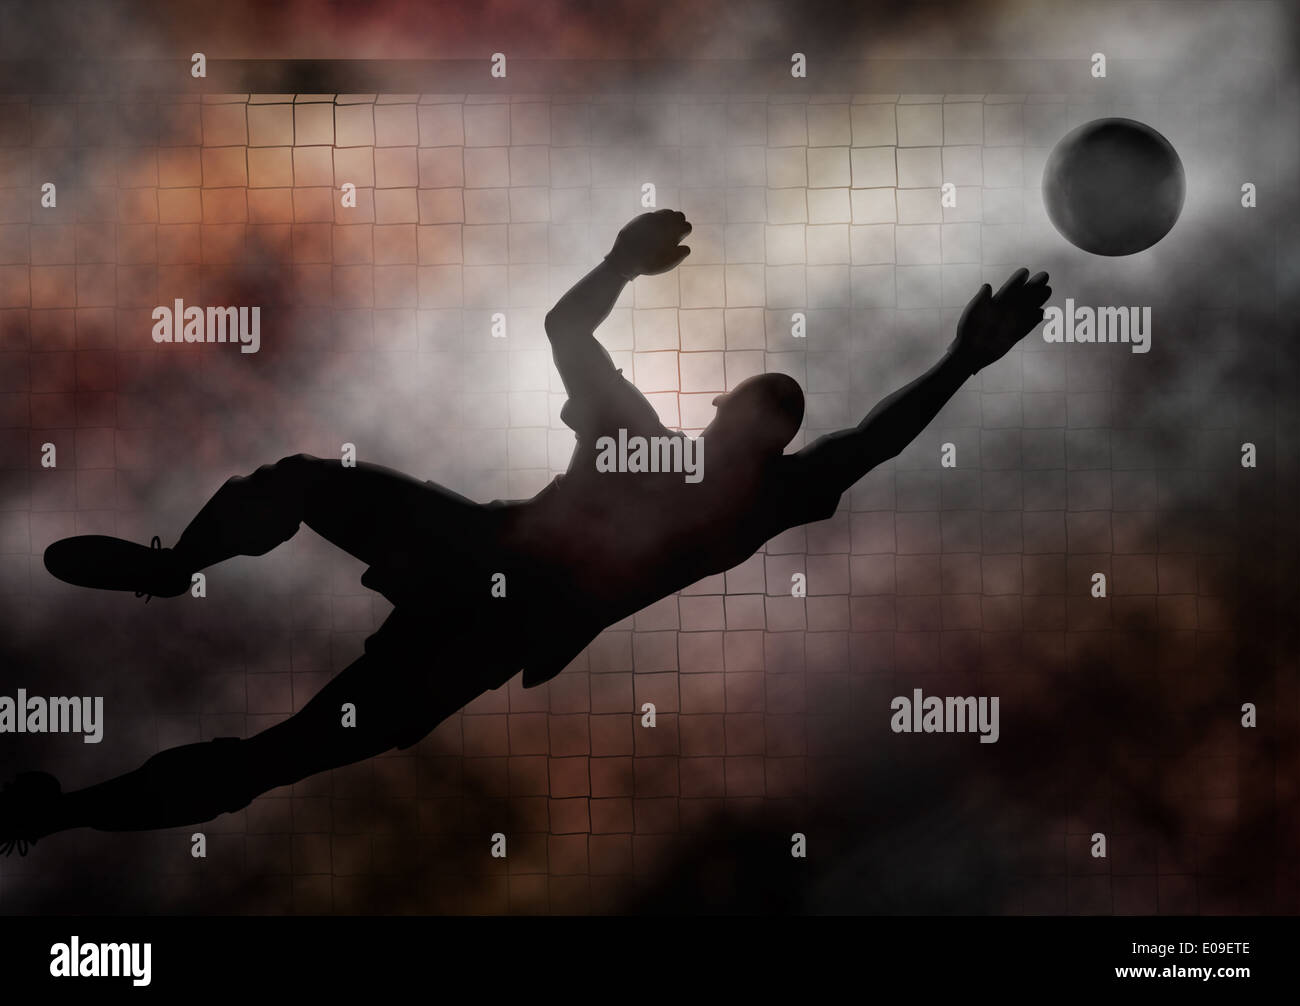 Dramatic illustration of a soccer goalkeeper diving to save a shot Stock Photo